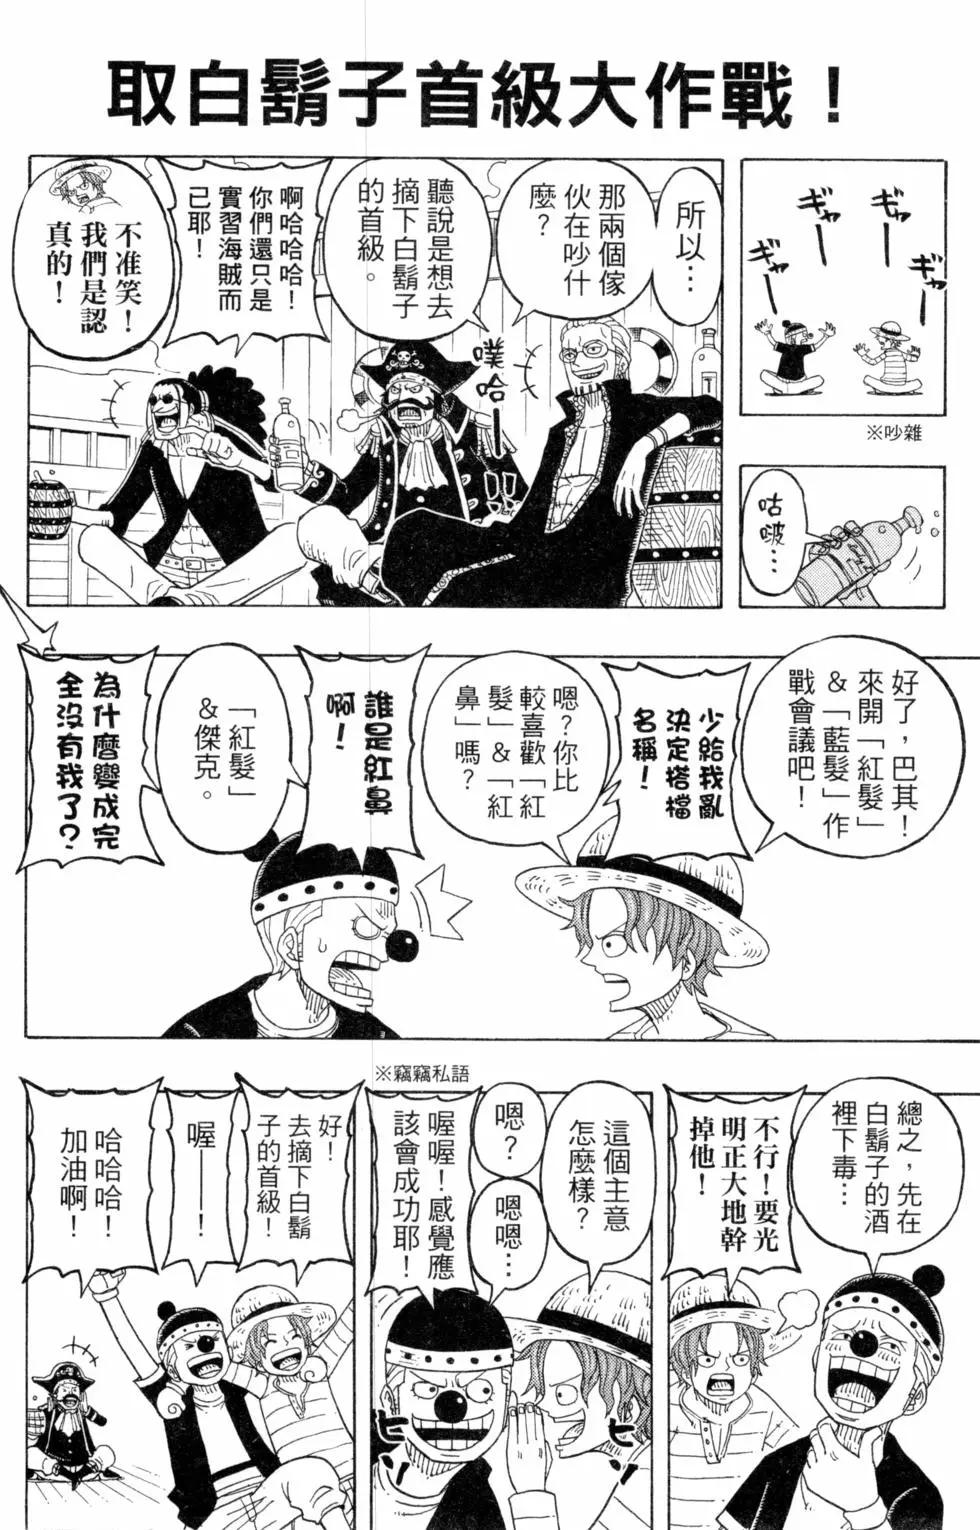 One piece party - 第06卷(1/4) - 3